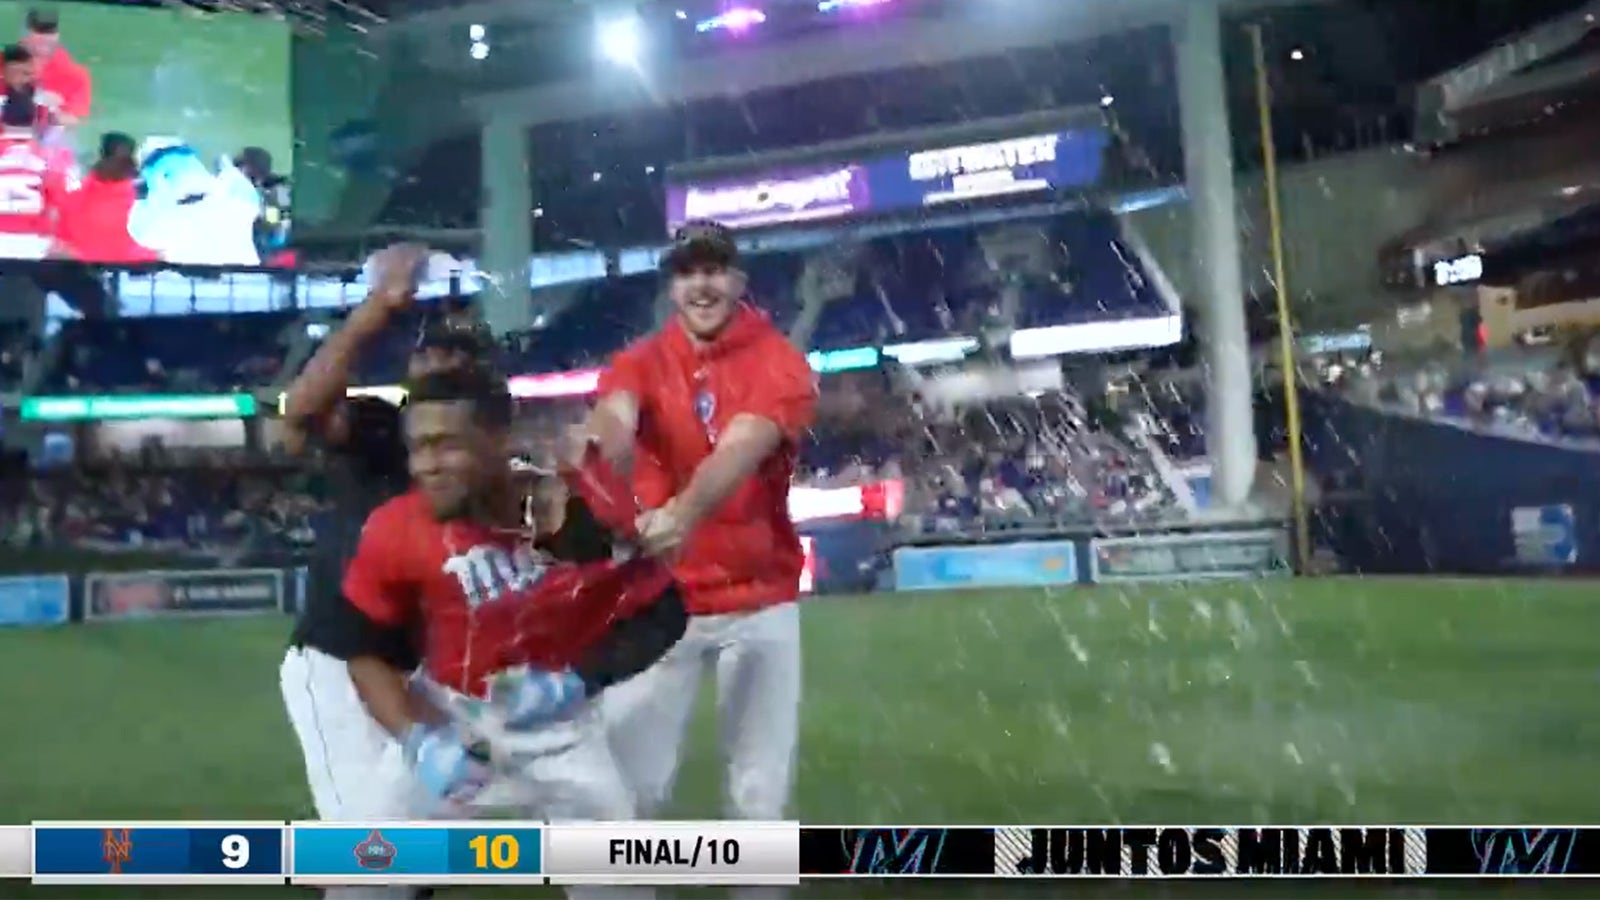 Otto Lopez knocks a walk-off single to secure the Marlins' win against the Mets in the tenth inning